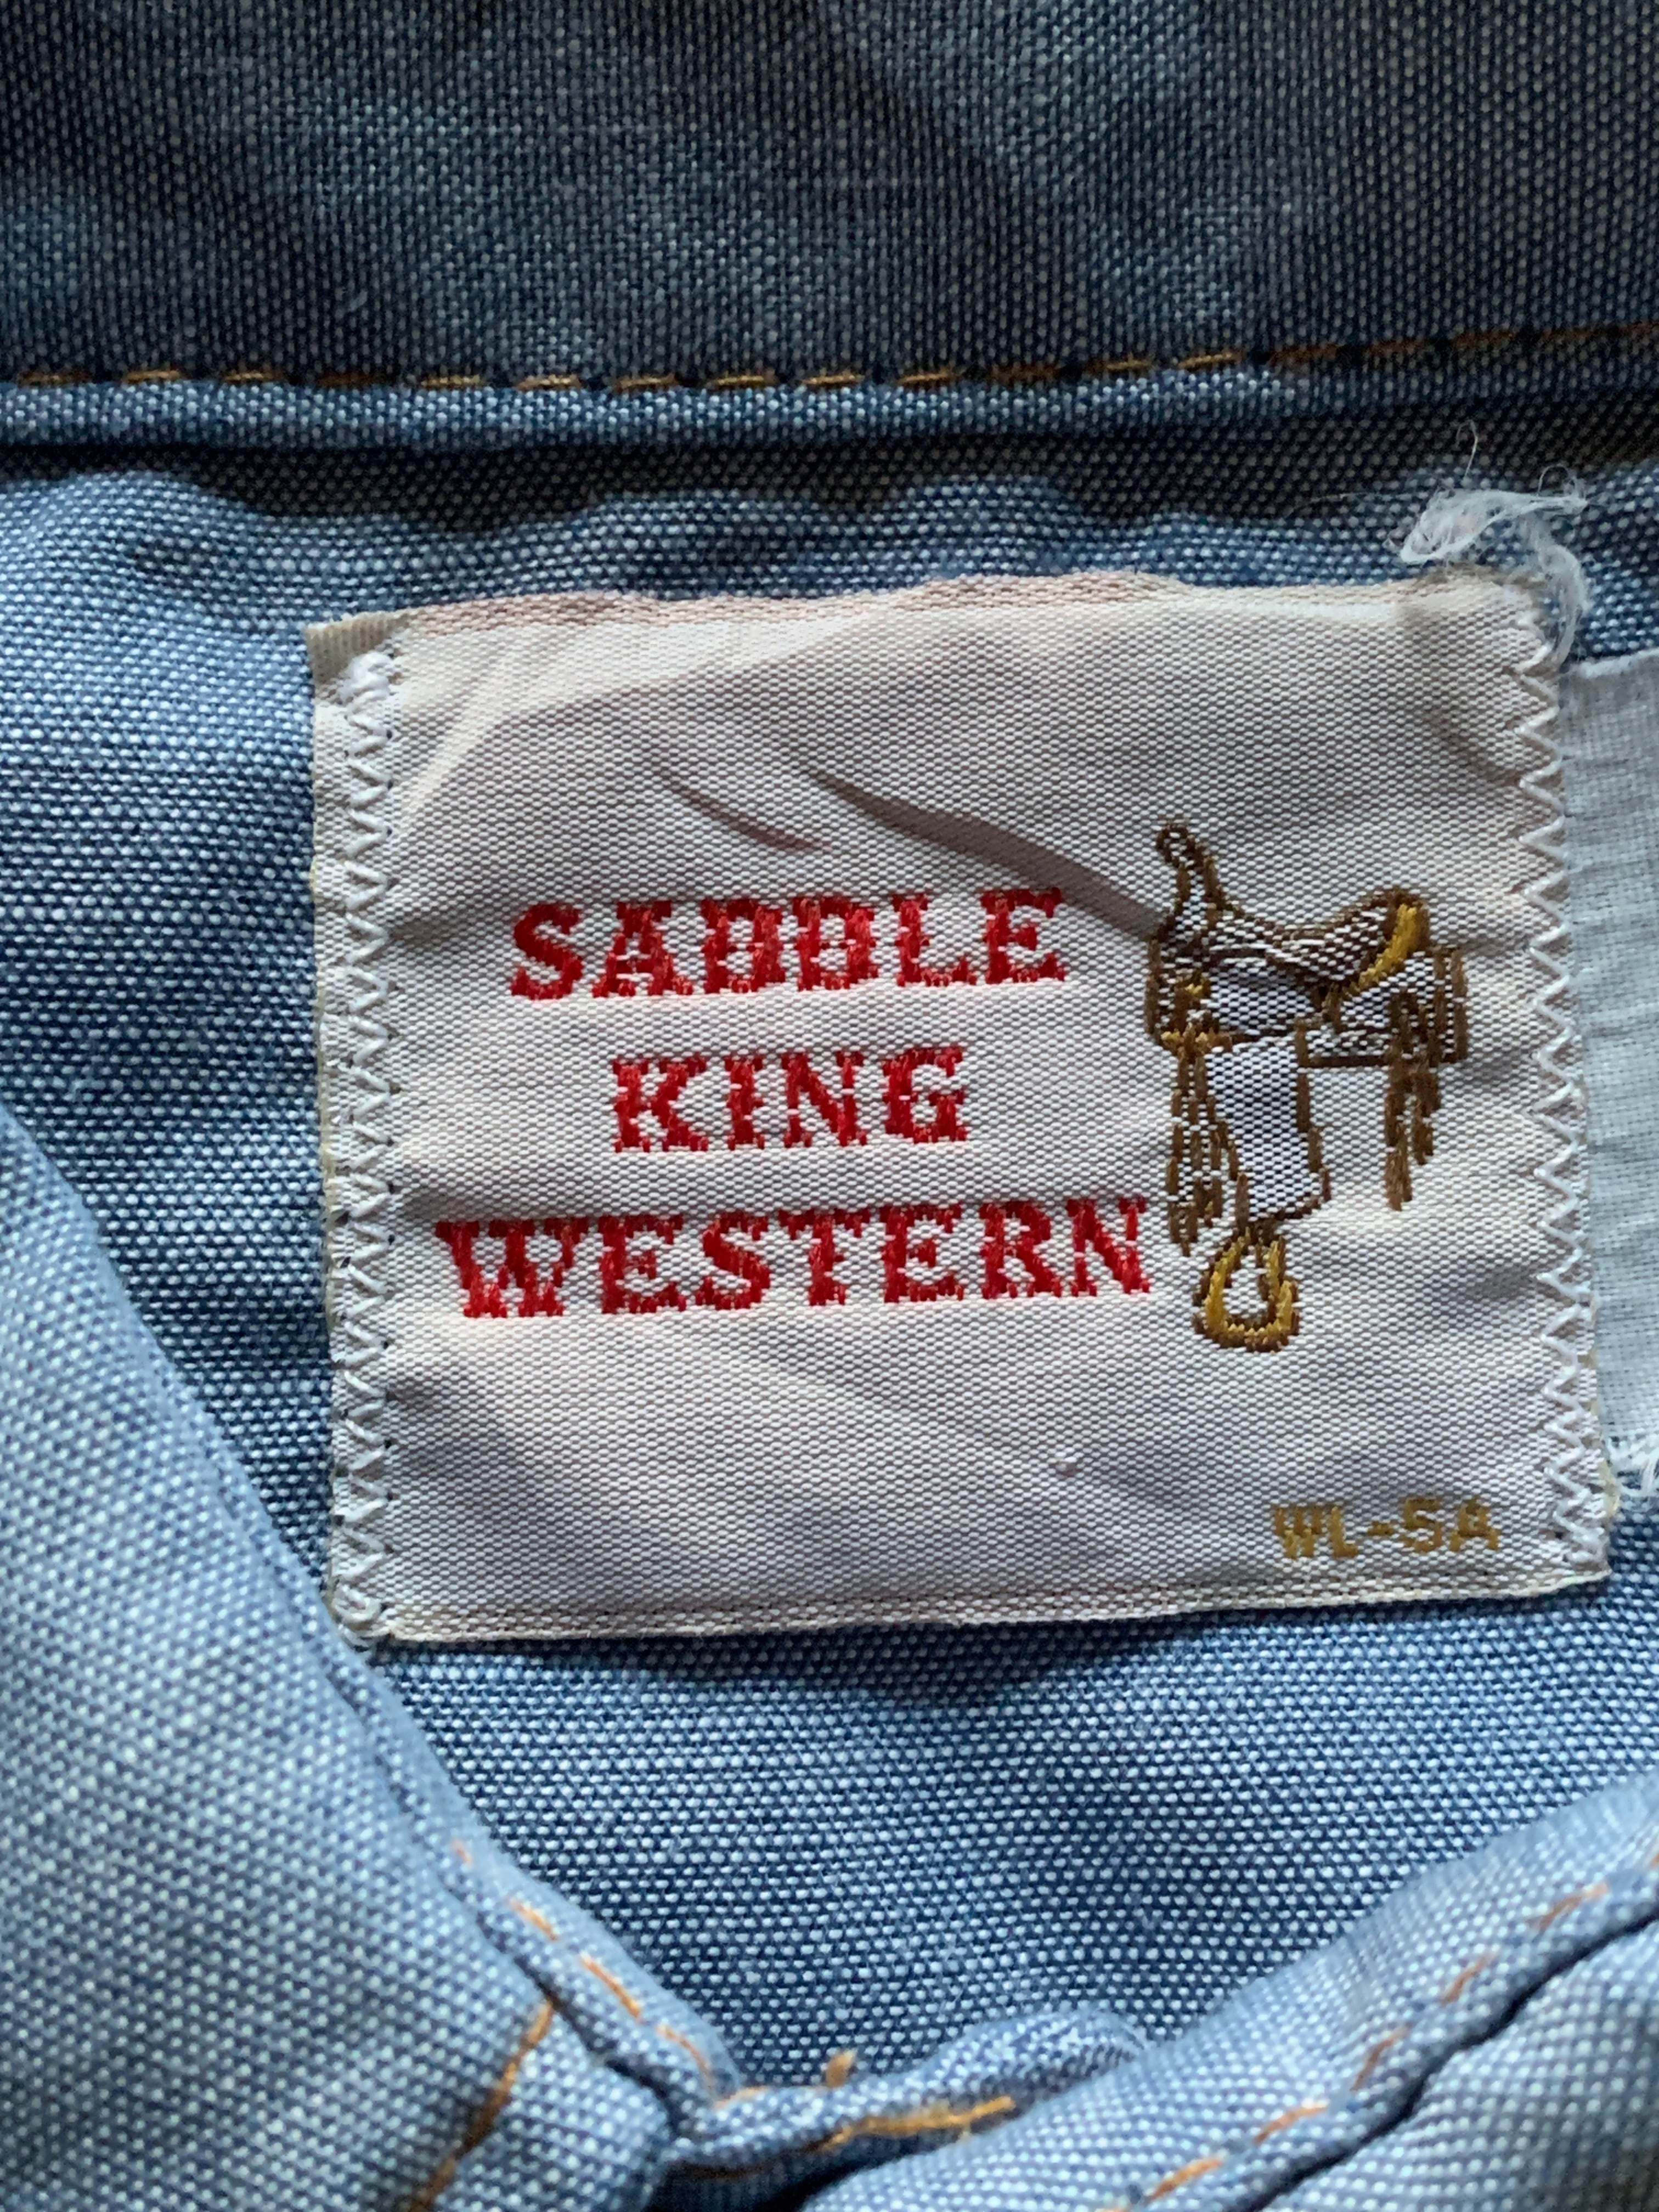 80's SADDLE KING WESTERN  ウエスタンシャンブレーシャツ 実寸(S位)